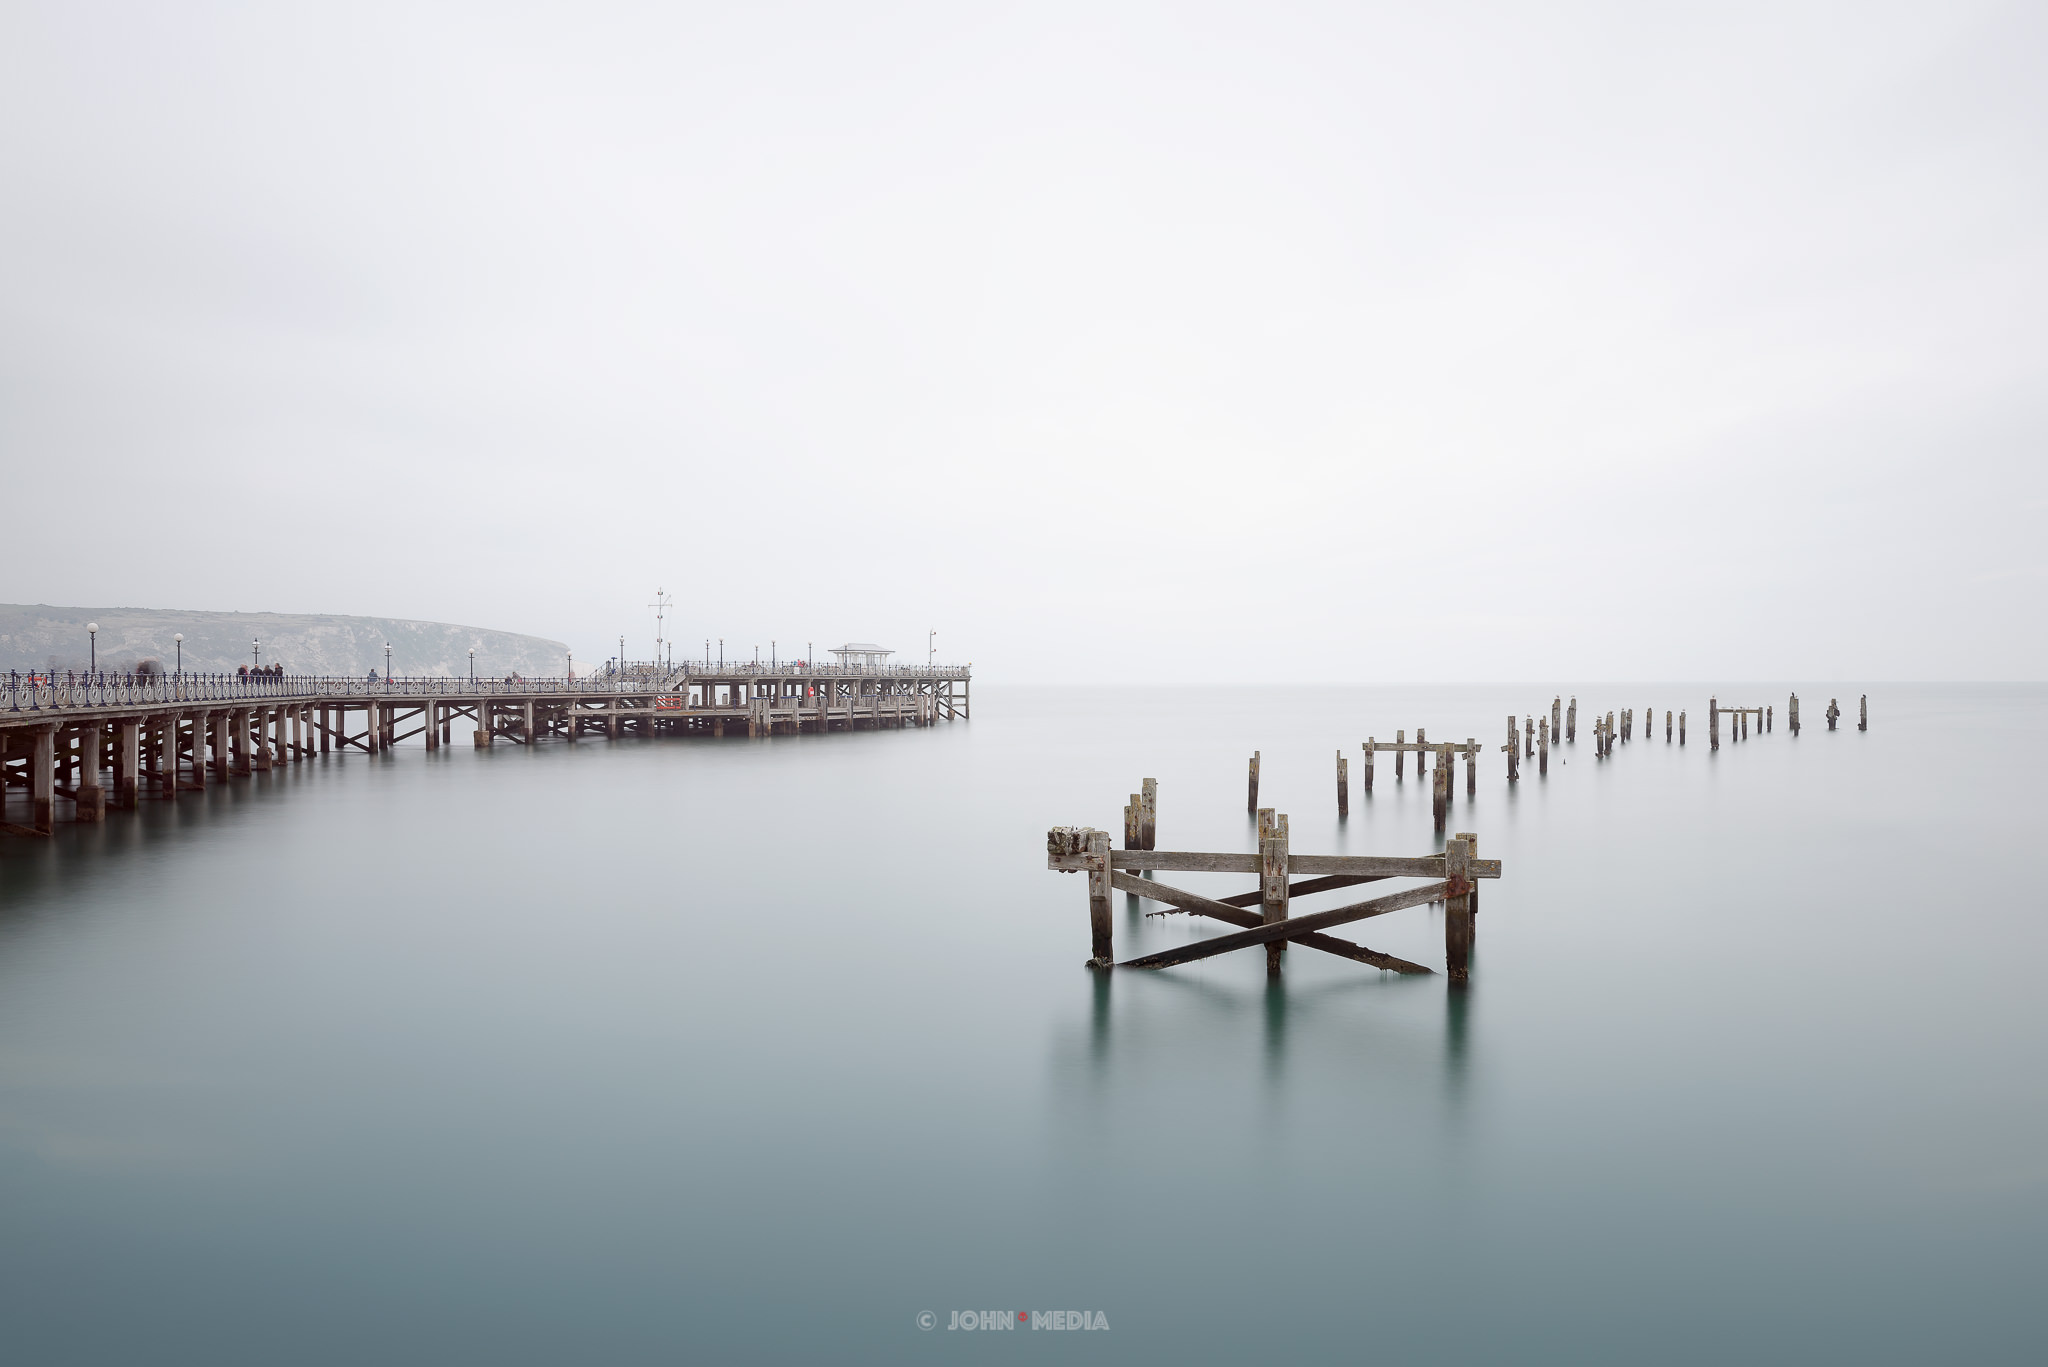 Swanage piers